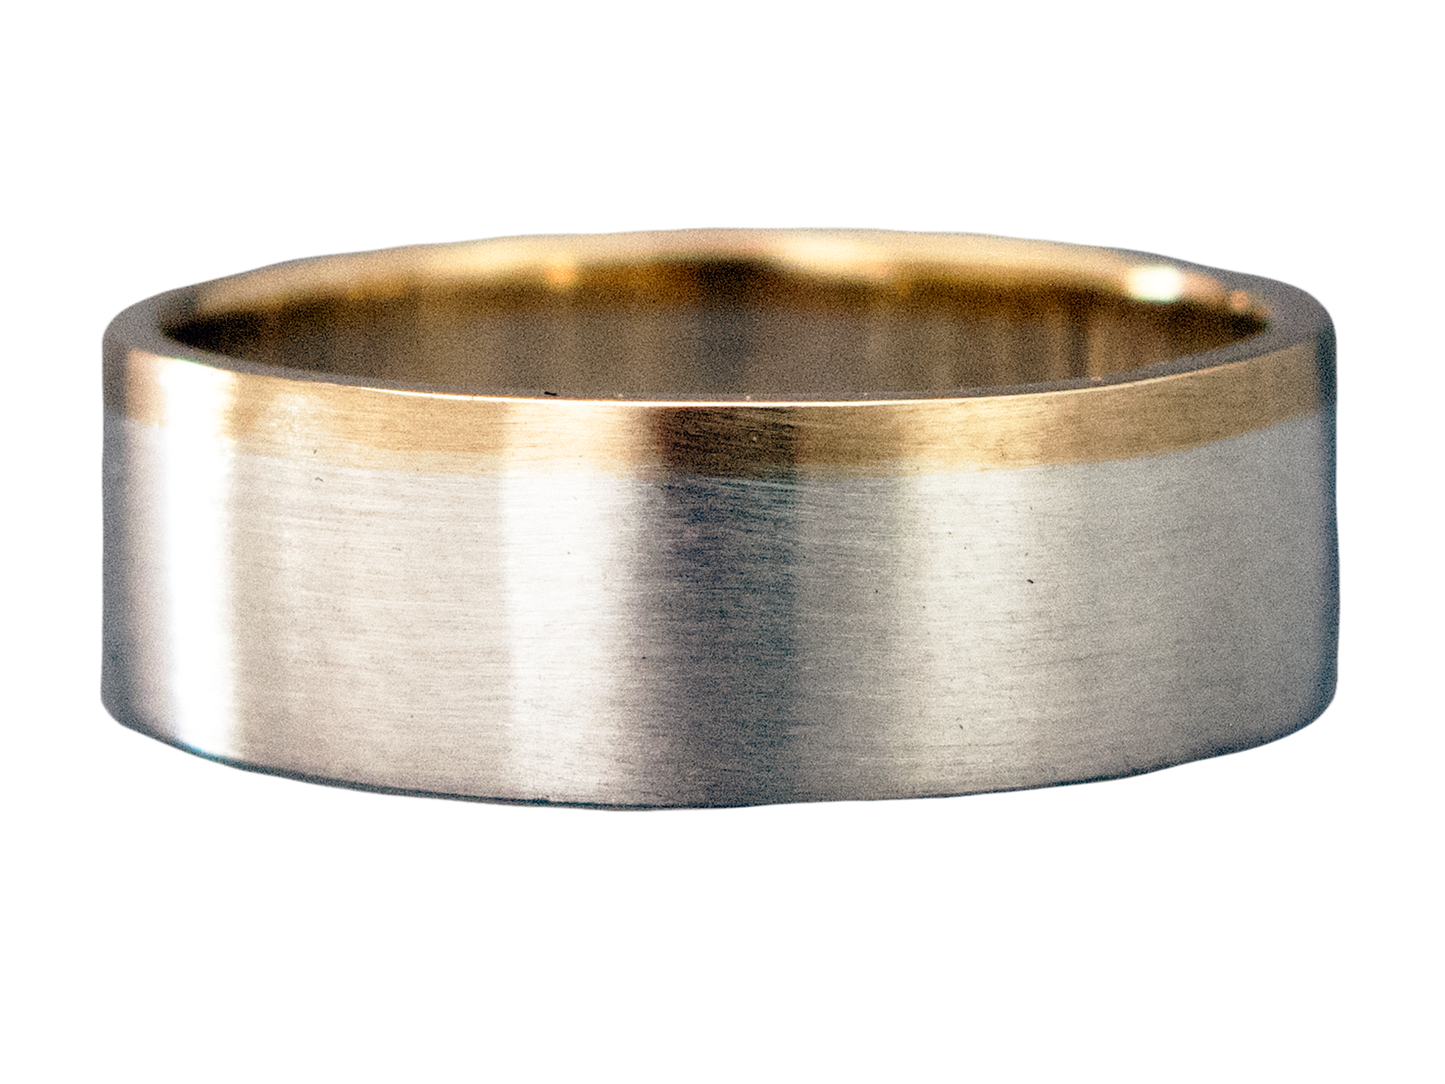 Part Of You Wide Flat Mixed Silver and Gold Wedding Band- Choice of 3mm-8mm widths, silver with a 1mm rail in white, rose or yellow gold